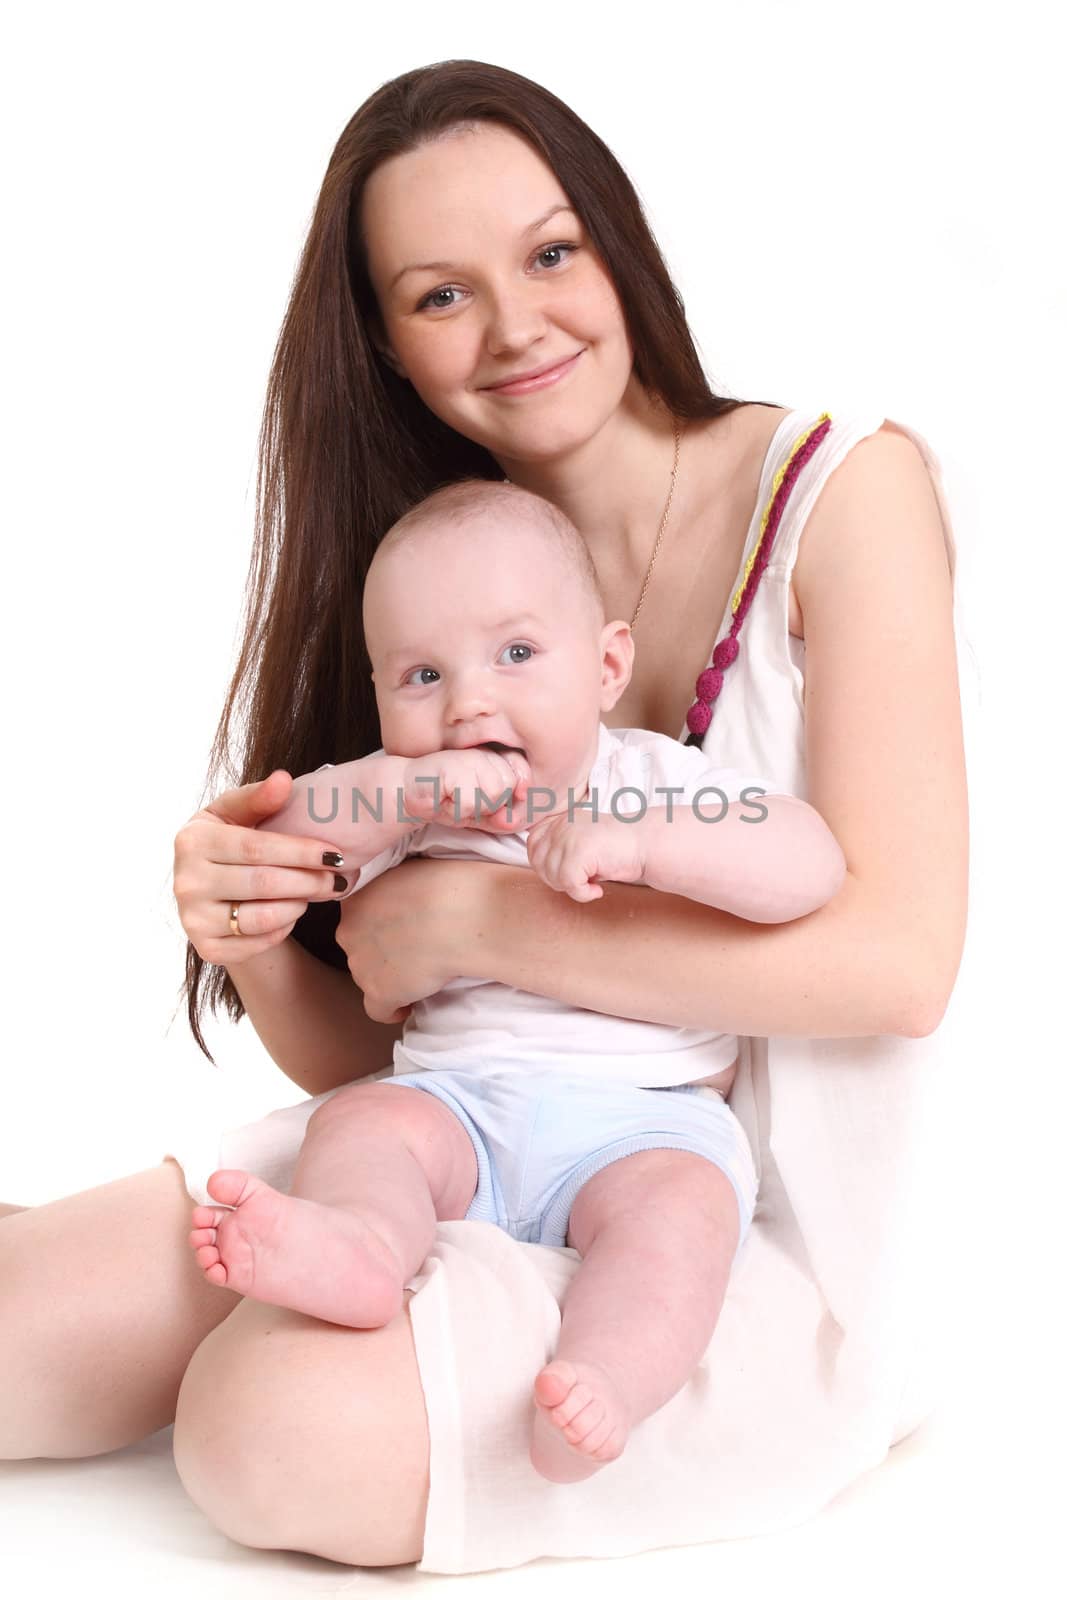 Young mum and the small son, portrait on a white background close up, the kid has put in a mouth a hand, a format vertical.